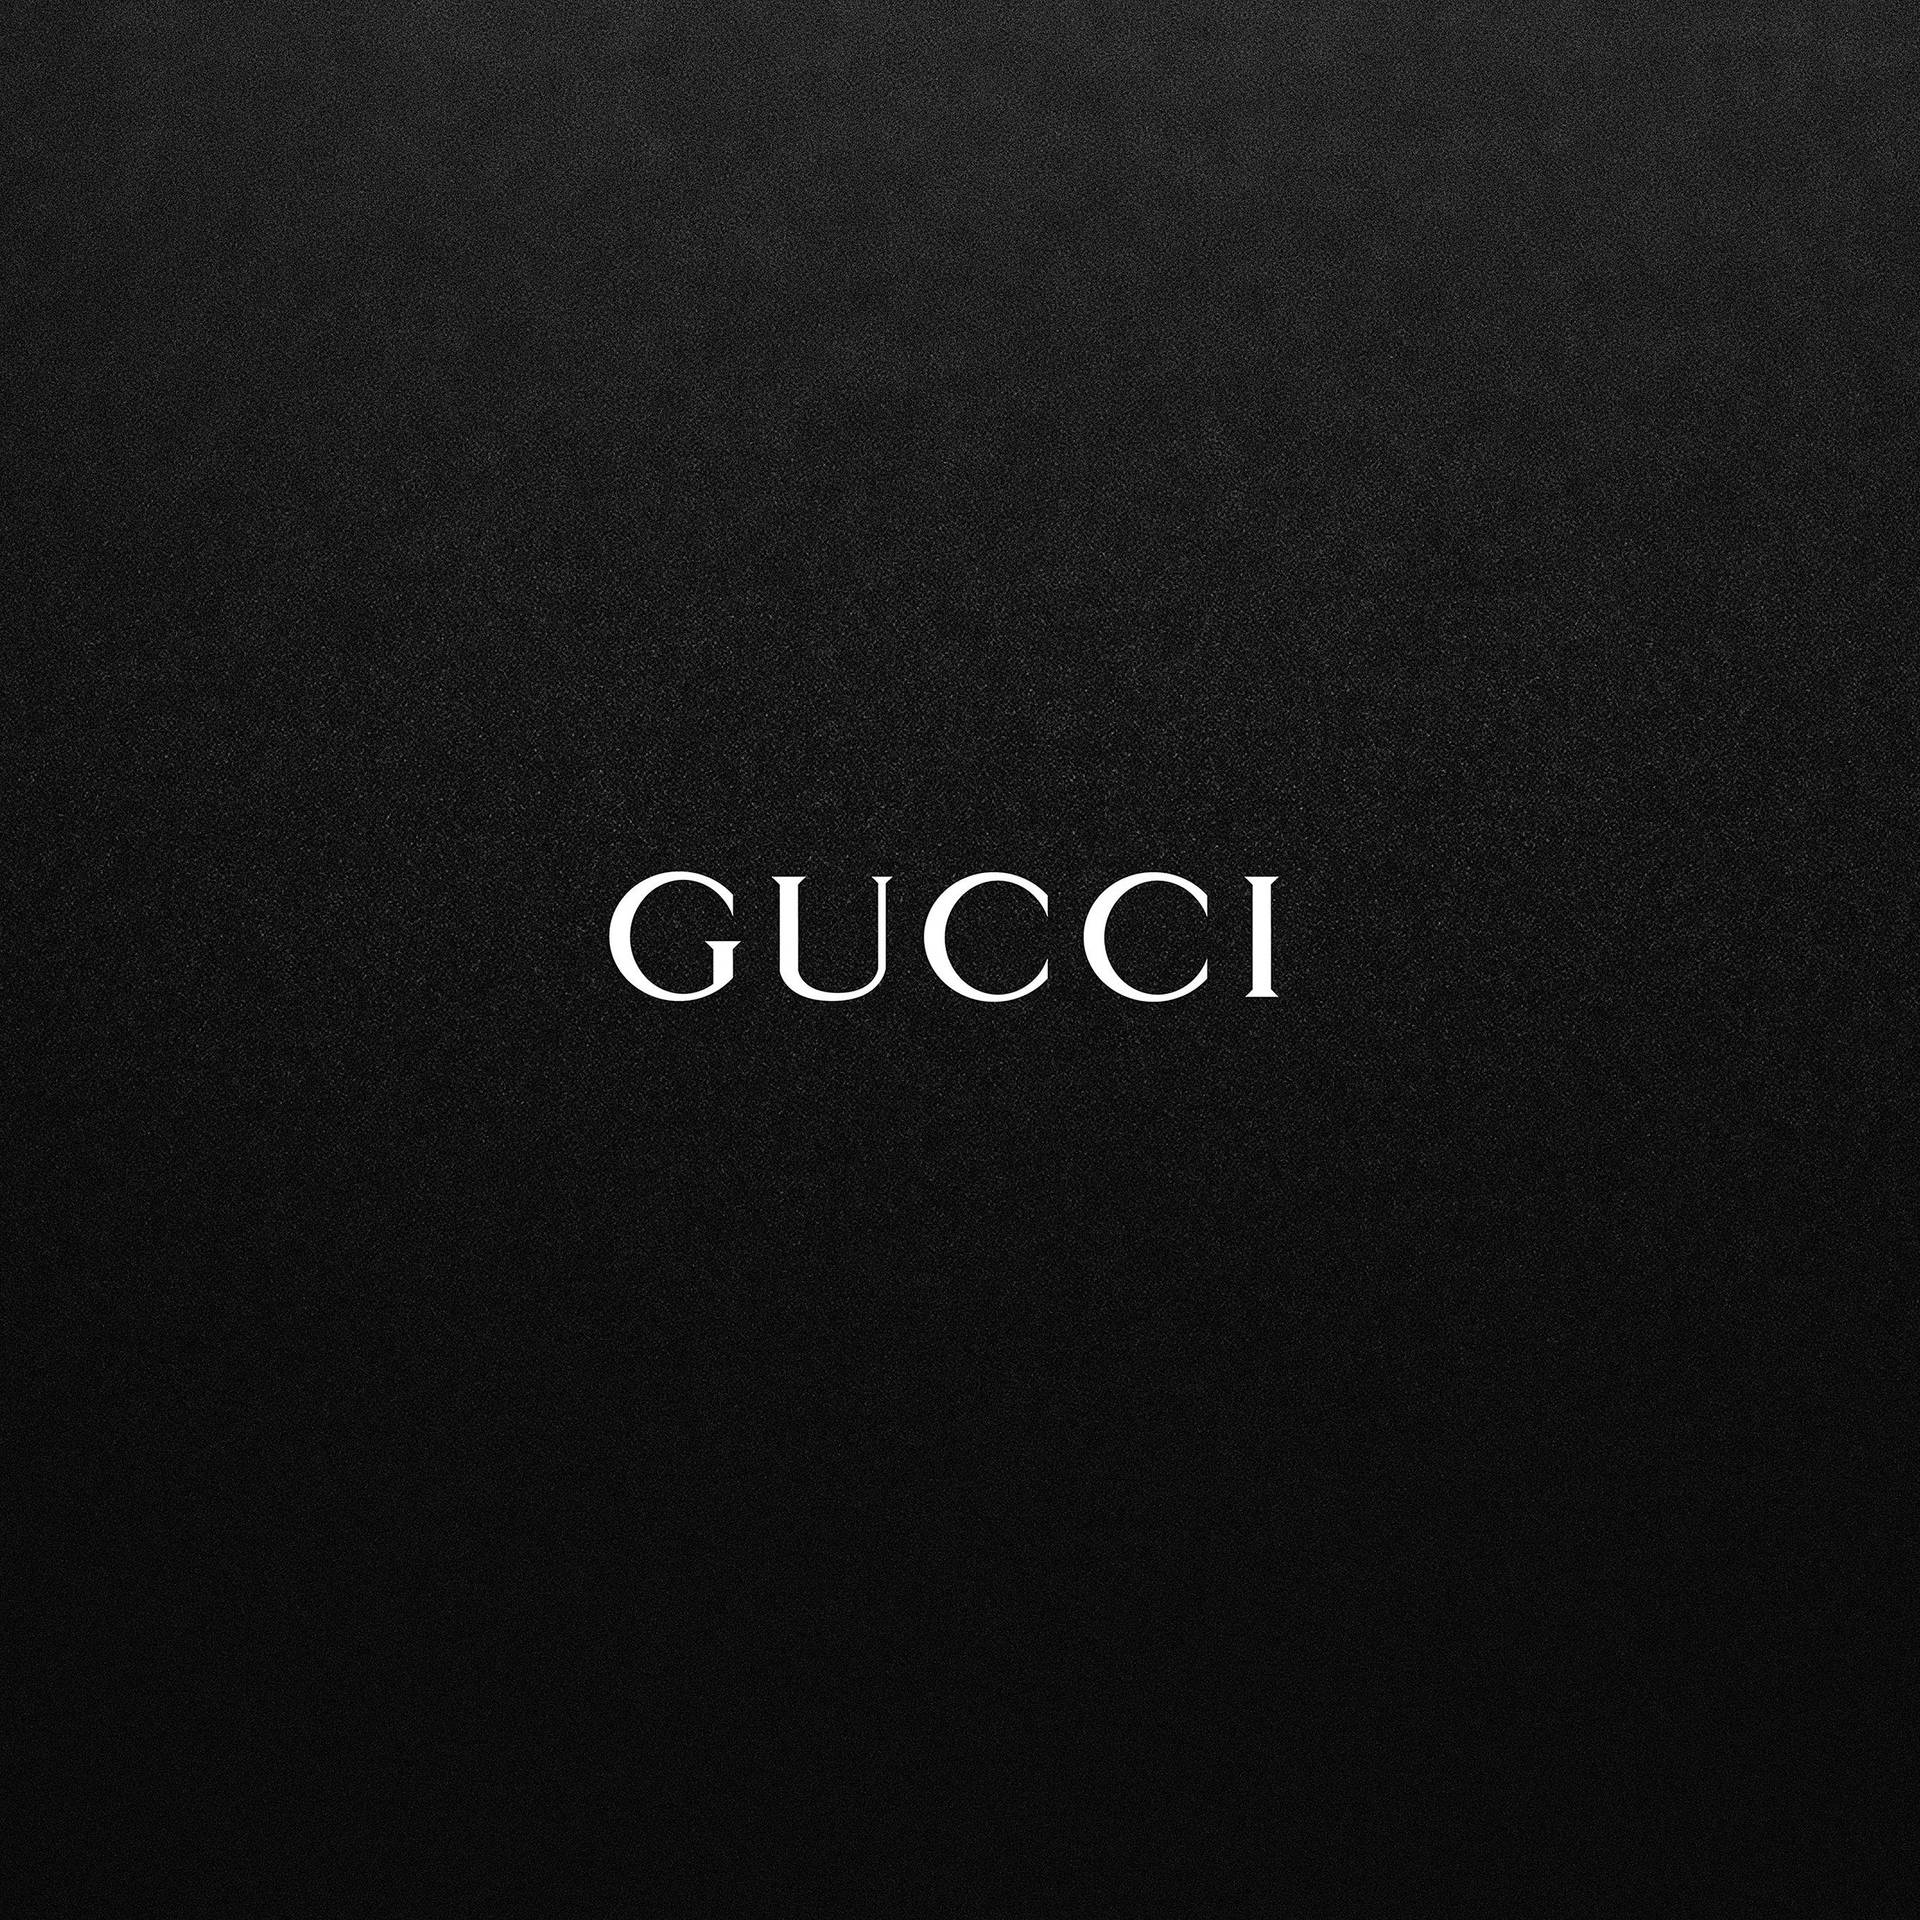 2732X2732 Gucci Wallpaper and Background